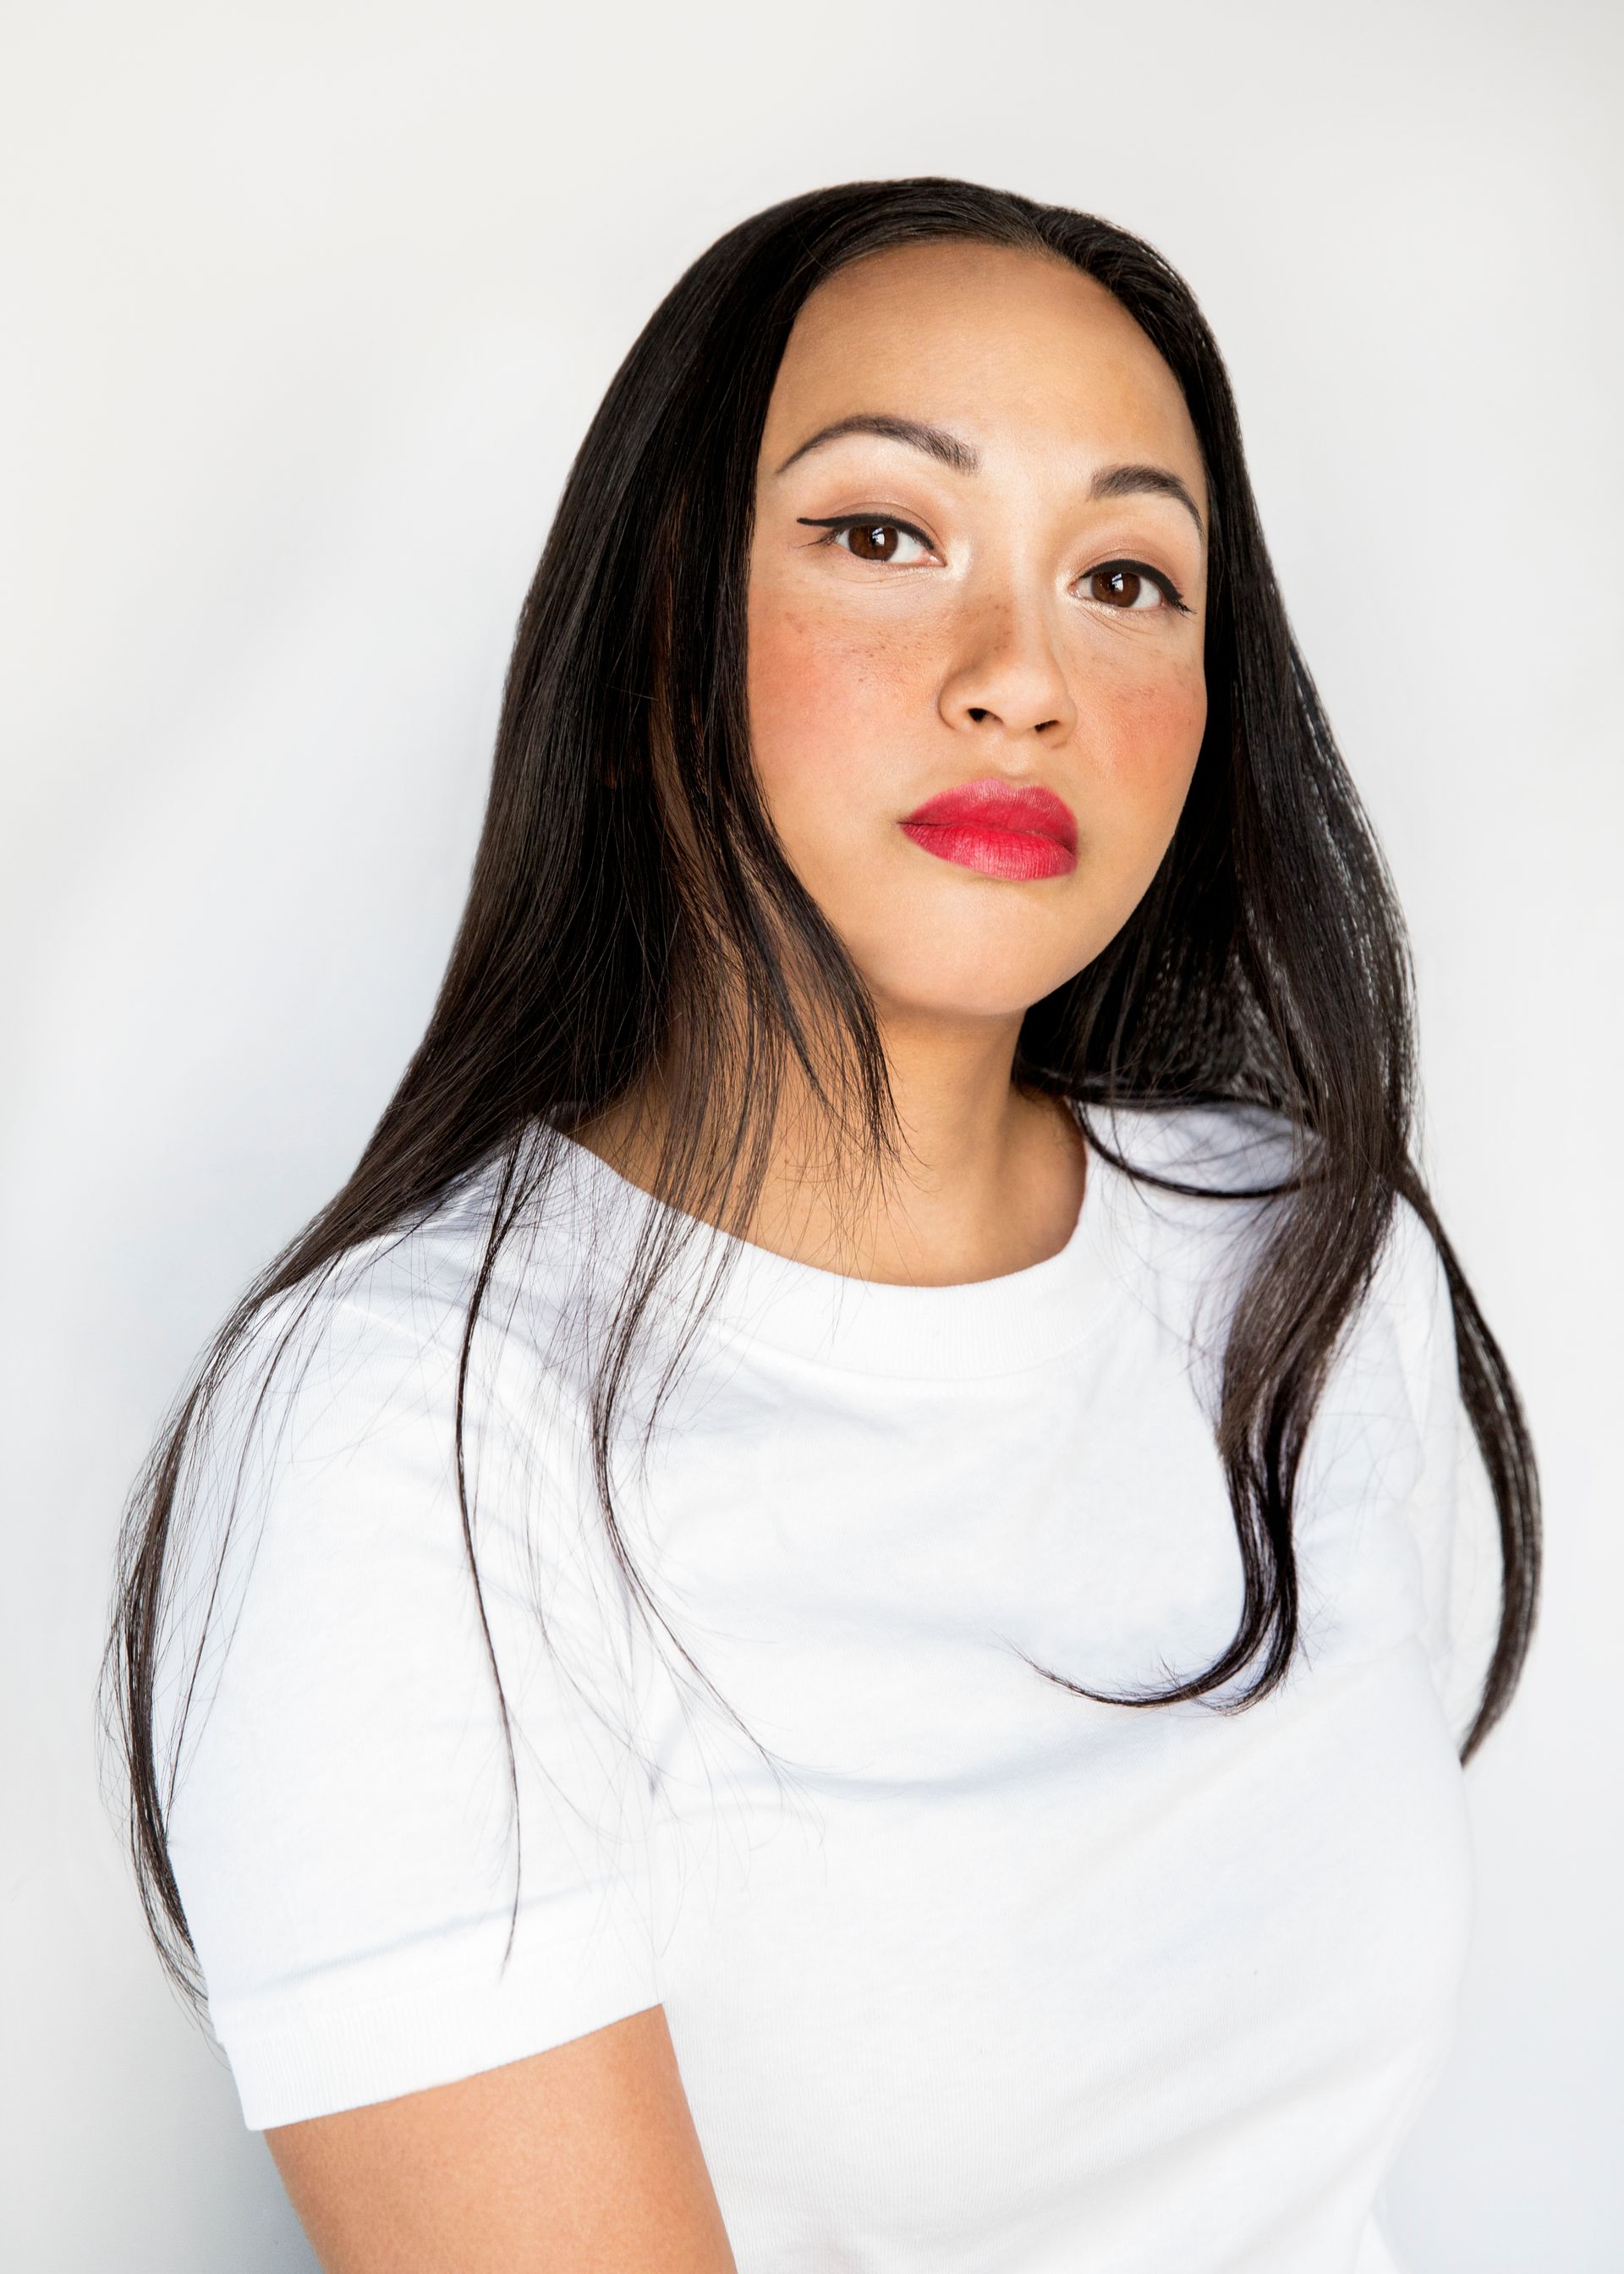 asian woman with long black hair and red lipstick